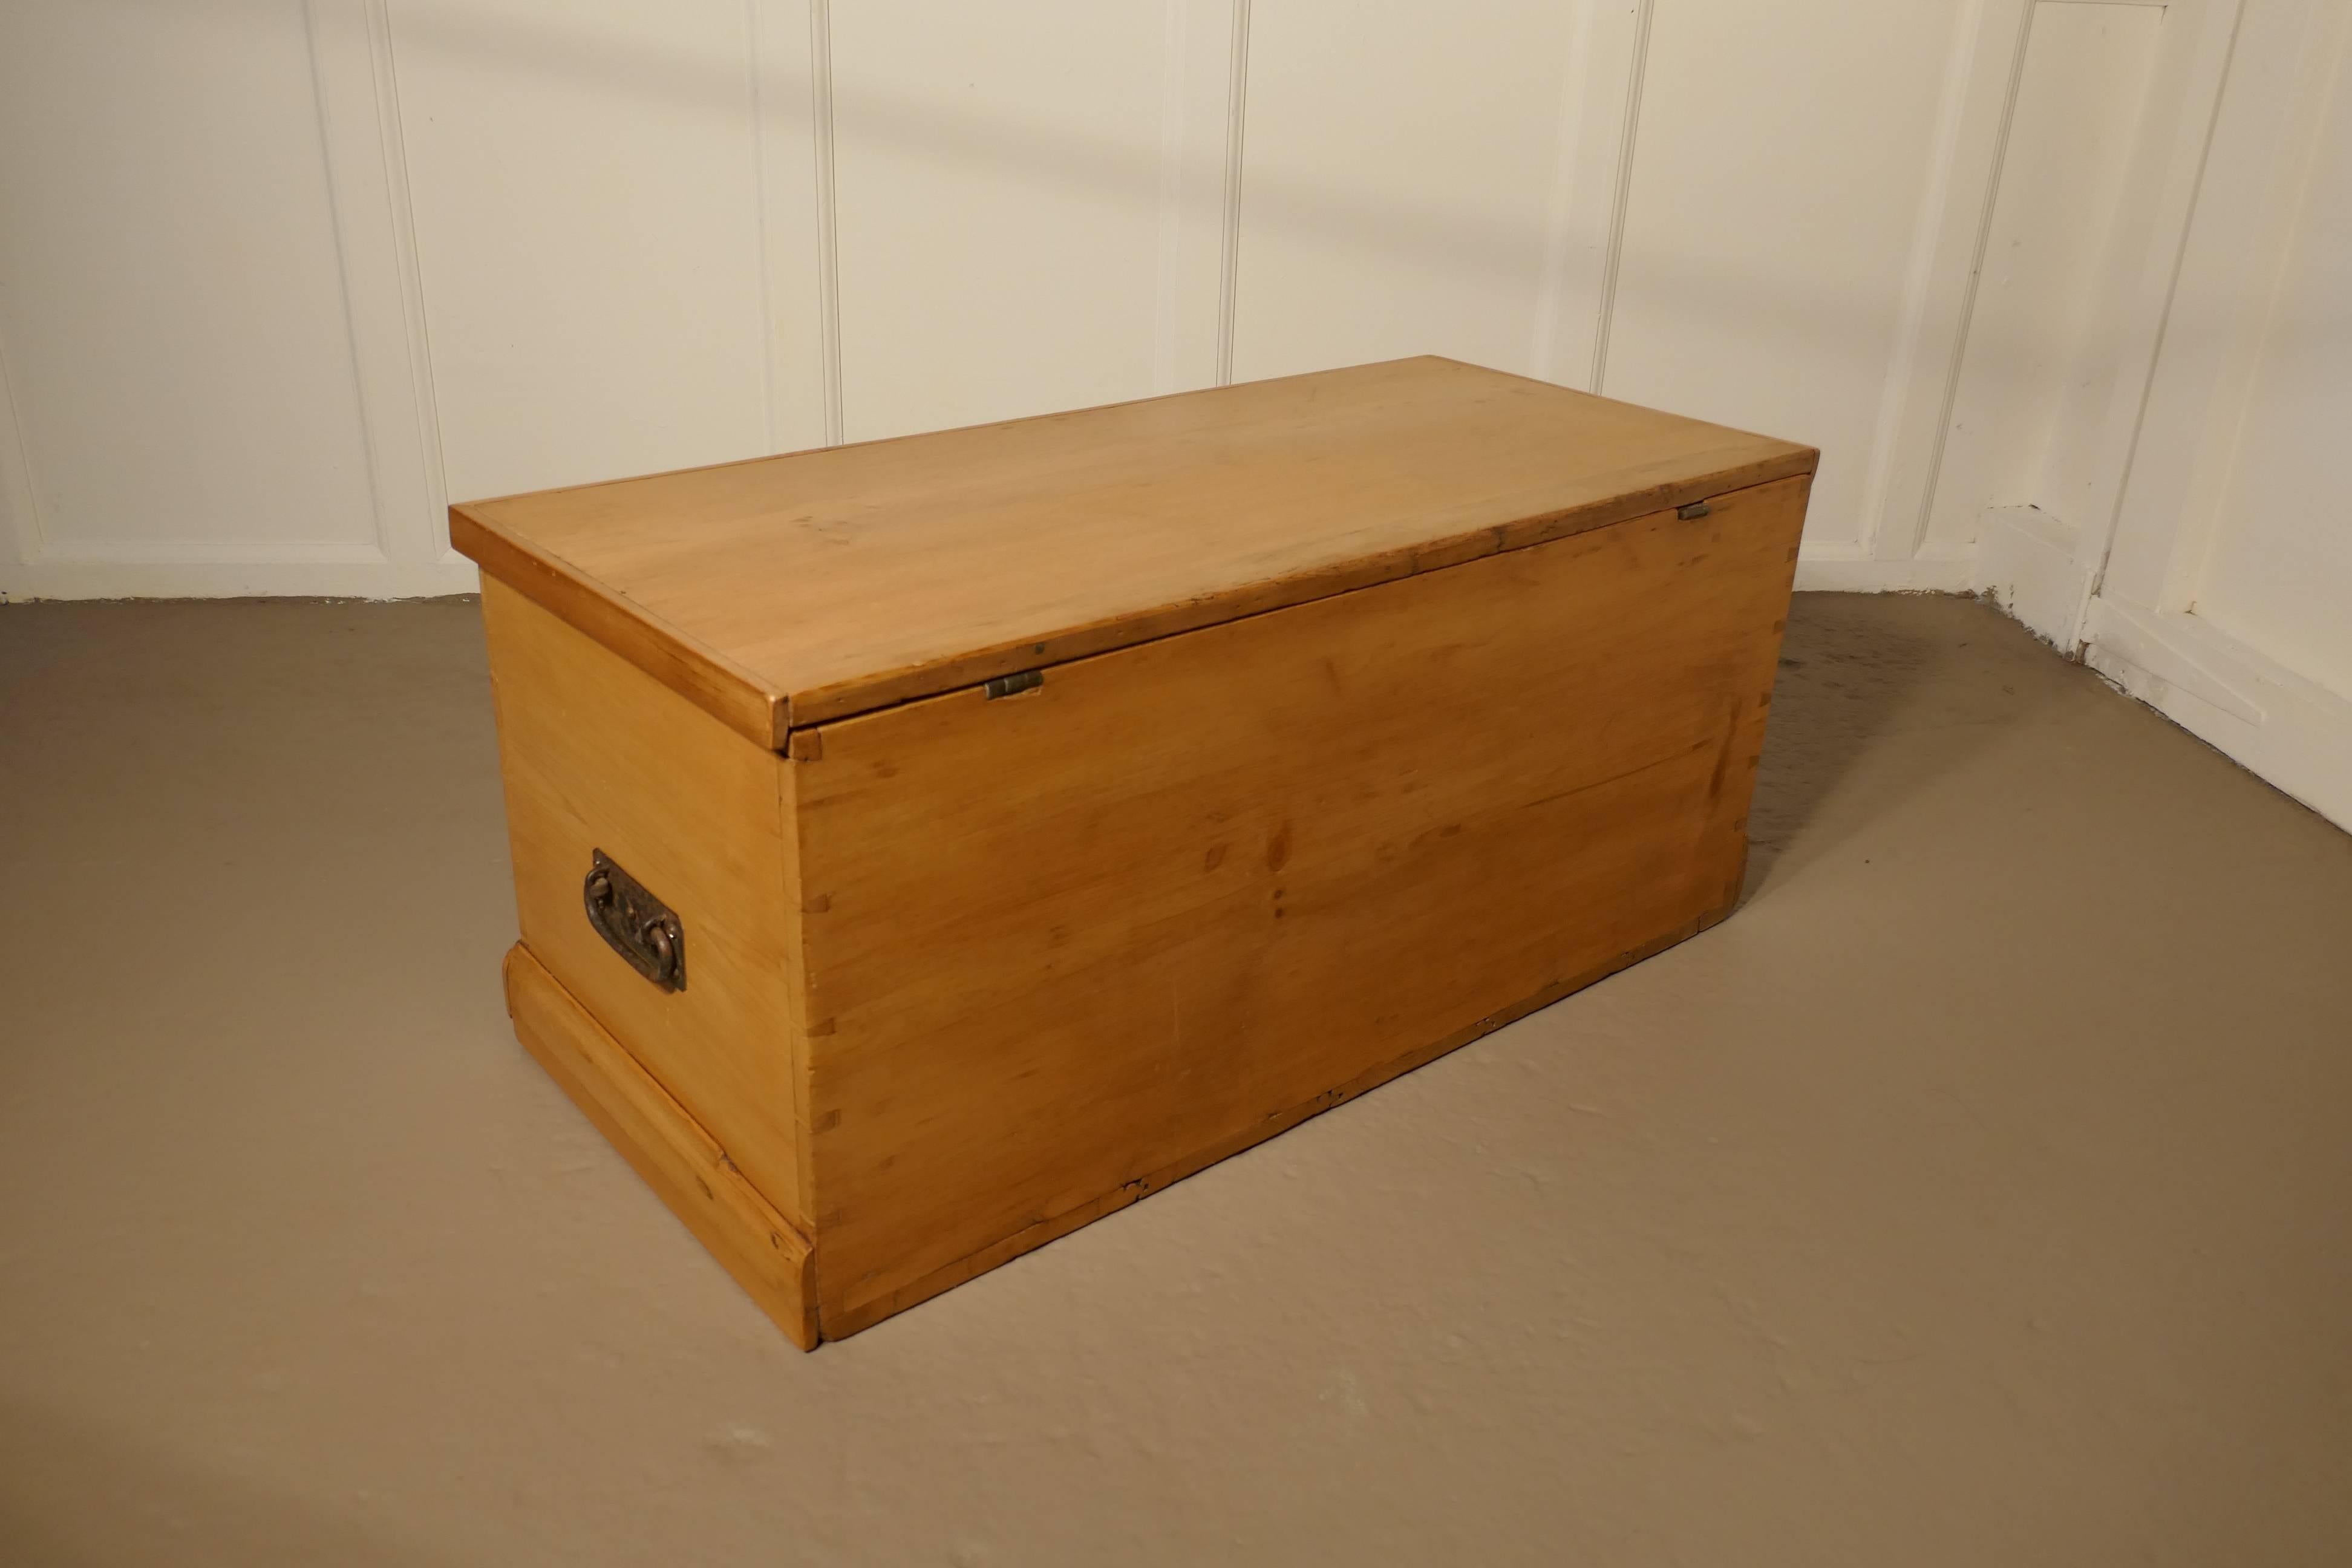 Victorian pine blanket box, coffee table or shoe tidy.
 
Victorian pine blanket box or coffee table
This is a good quality pine box it has been fully restored, it has a candle box inside and iron carrying handles outside and it stands on a small